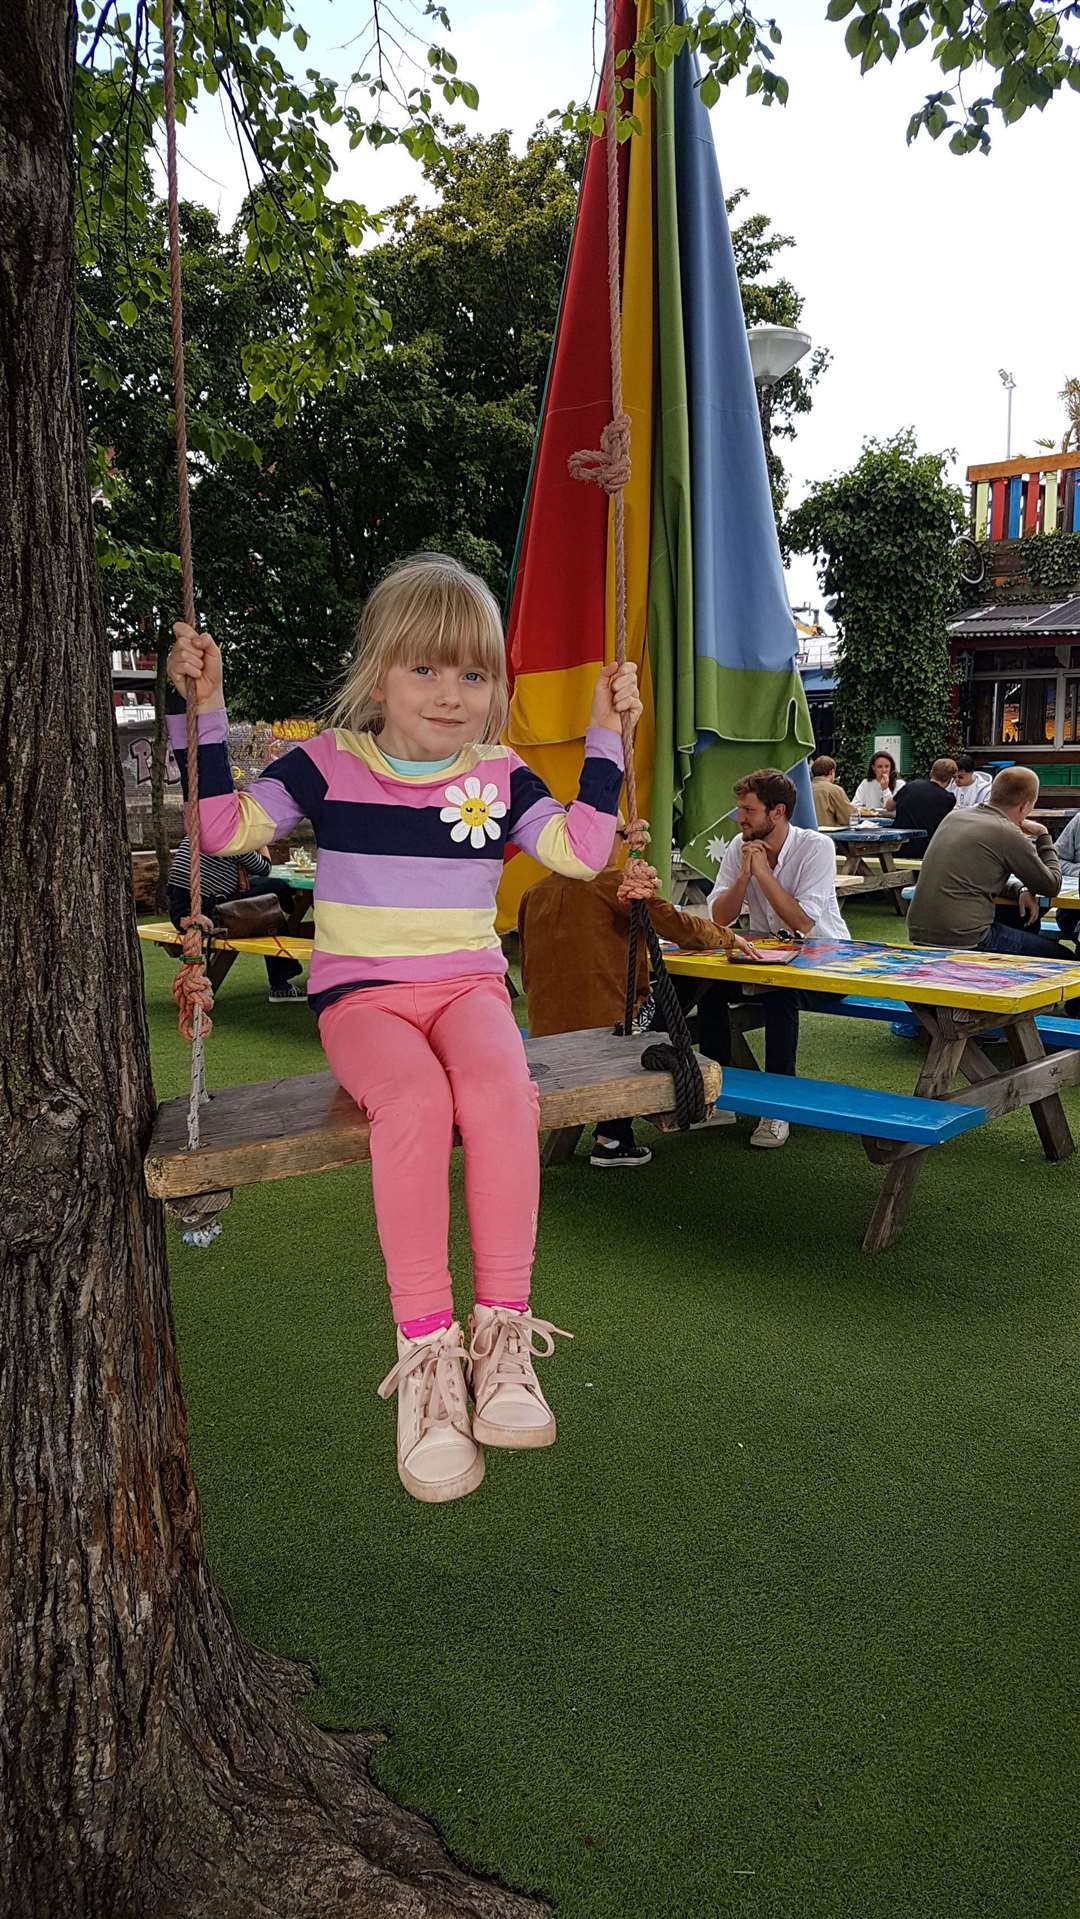 Jessica enjoying the swing at Hannekes Boom. Picture: PA Photo/Kirsty Masterman